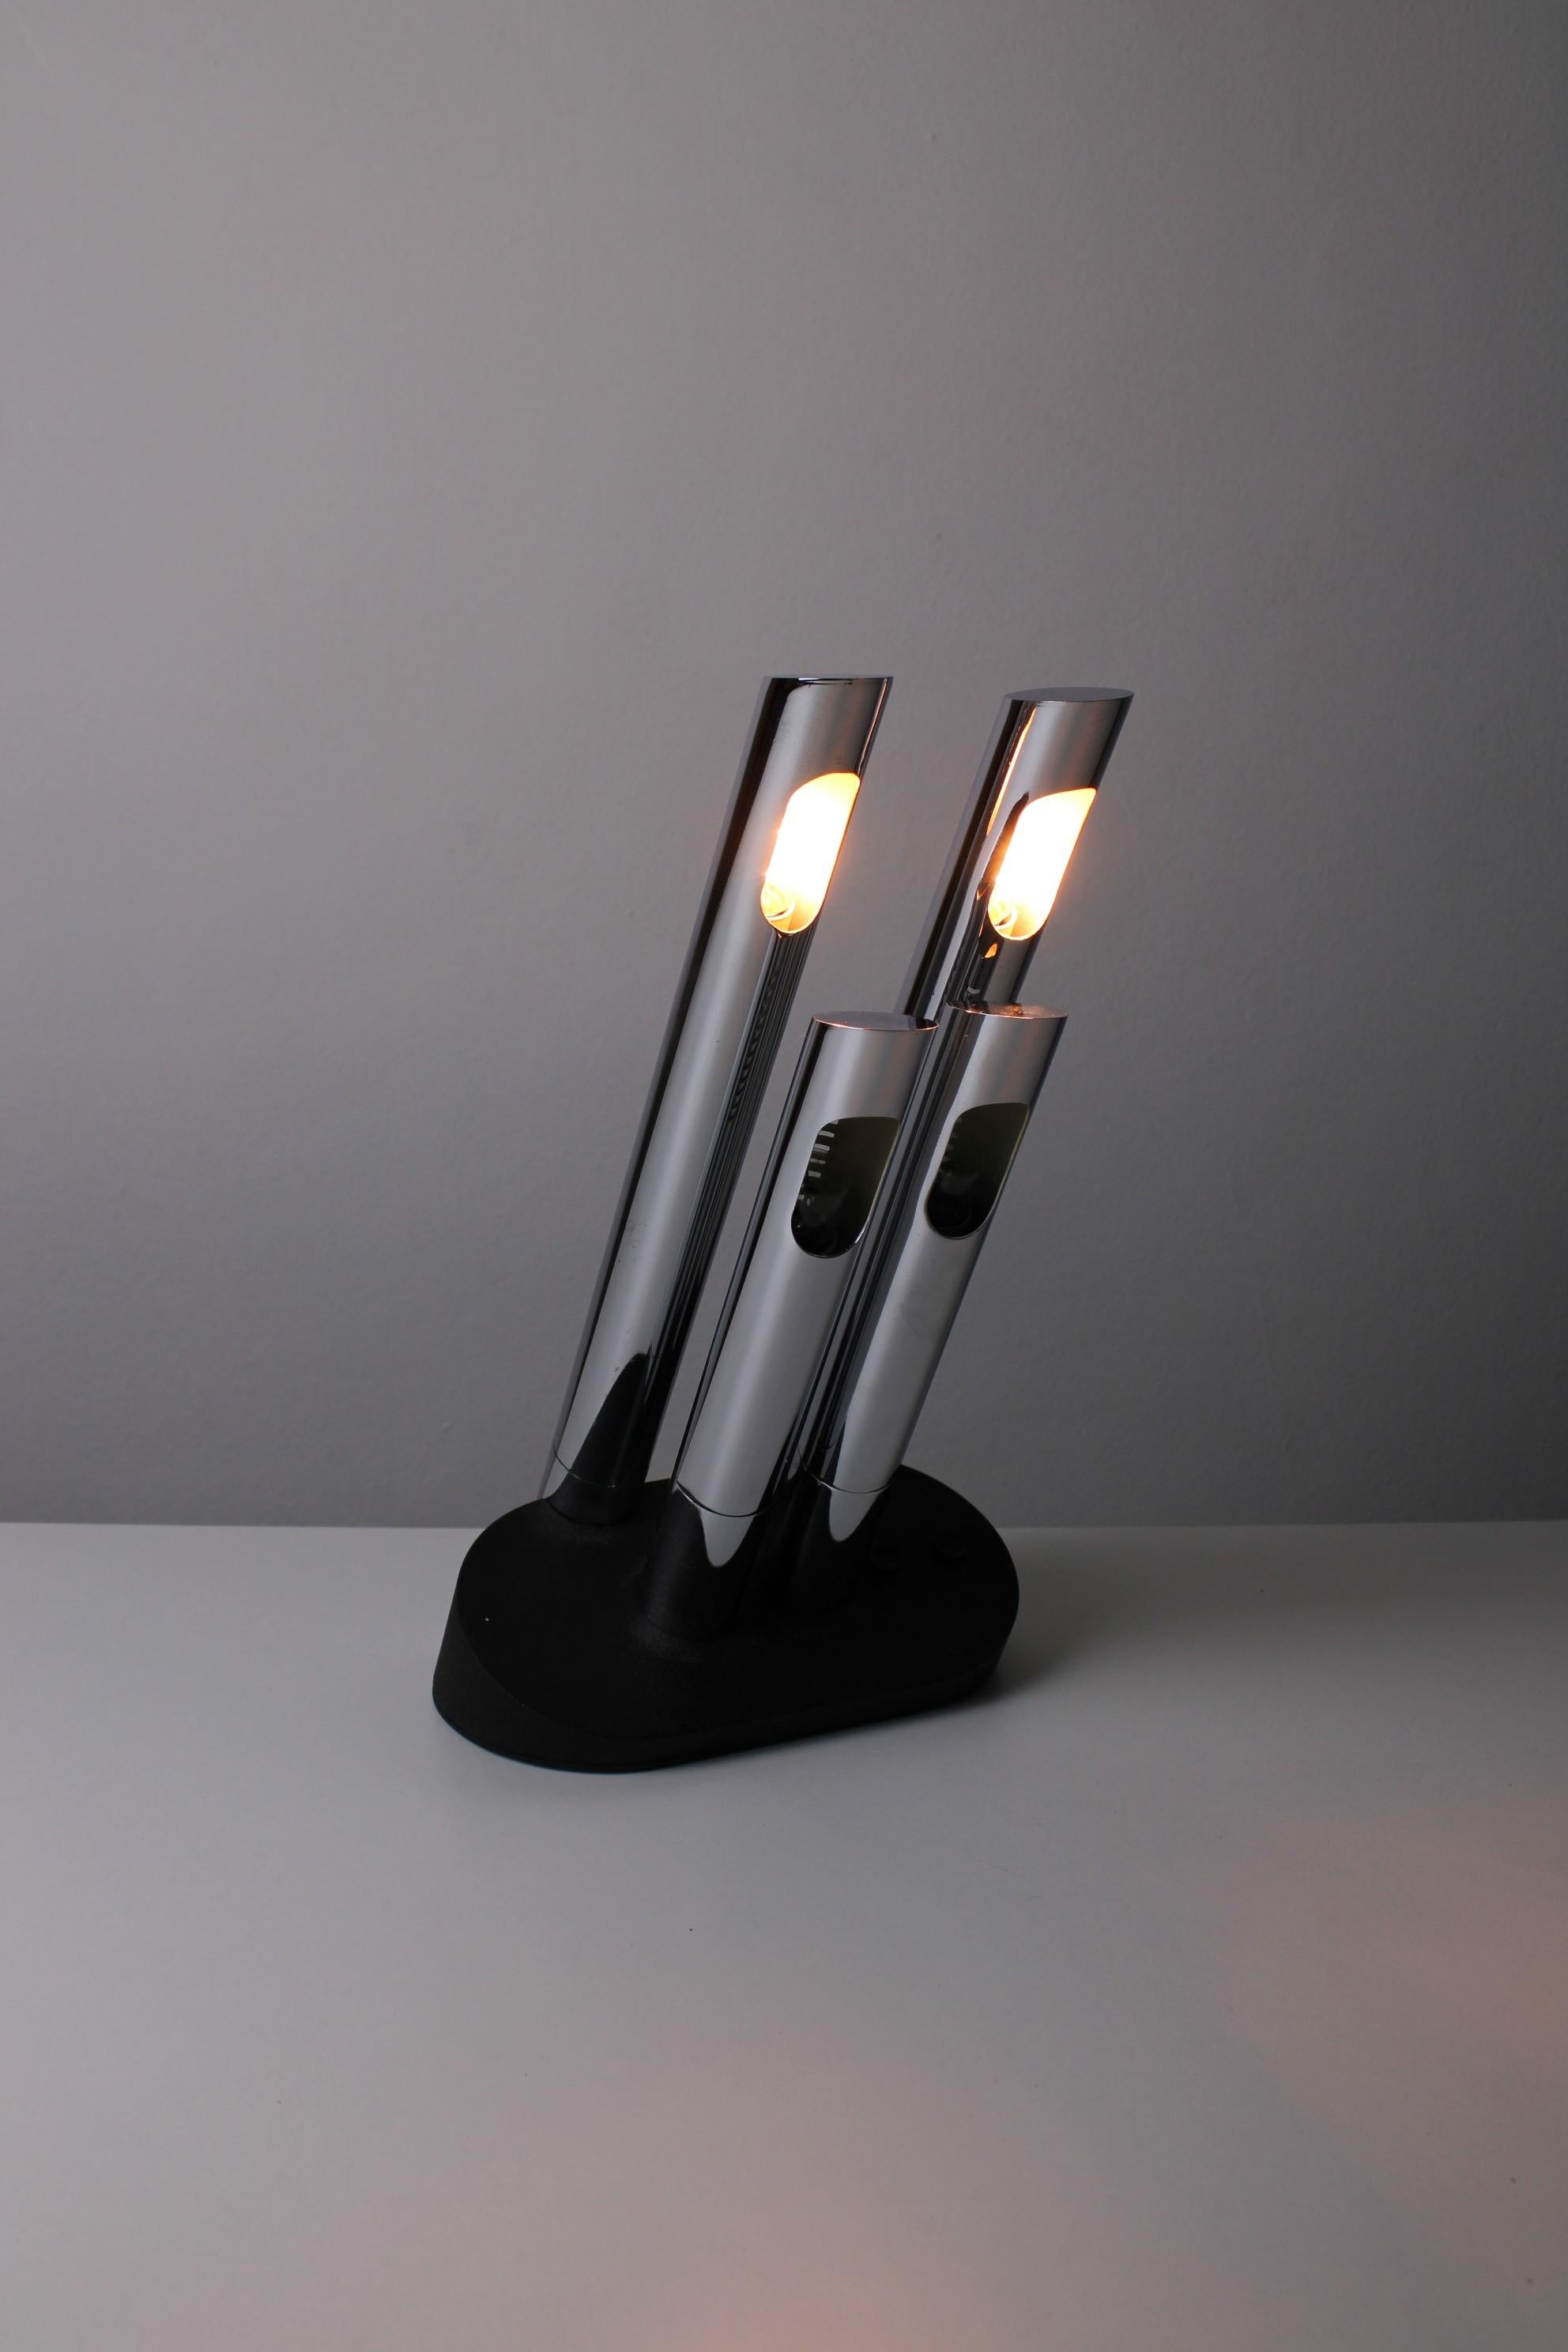 Futuristic table lamp, model President (T443). Designed by Mario Faggian for Luci Illuminazione in 1974. A typical 70s design, featuring four oblique silver colored tubes and a black metal base. Each tube is equipped with a E14 socket. The lamp has